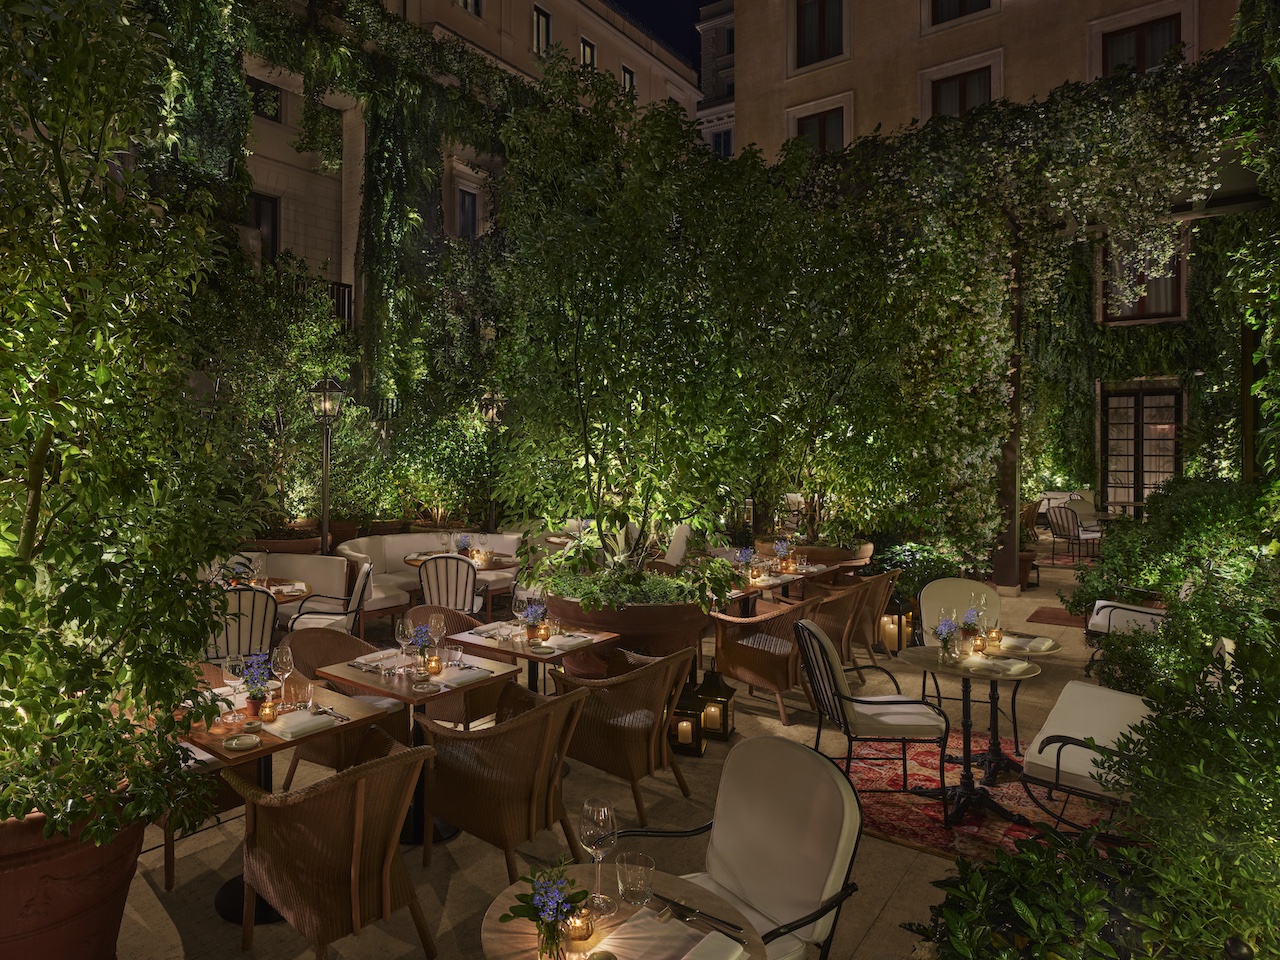 The Rome EDITION is set to dazzle with a spectacular range of restaurants and bars, including Anima, spearheaded by much admired Roman chef Paola Colucci.